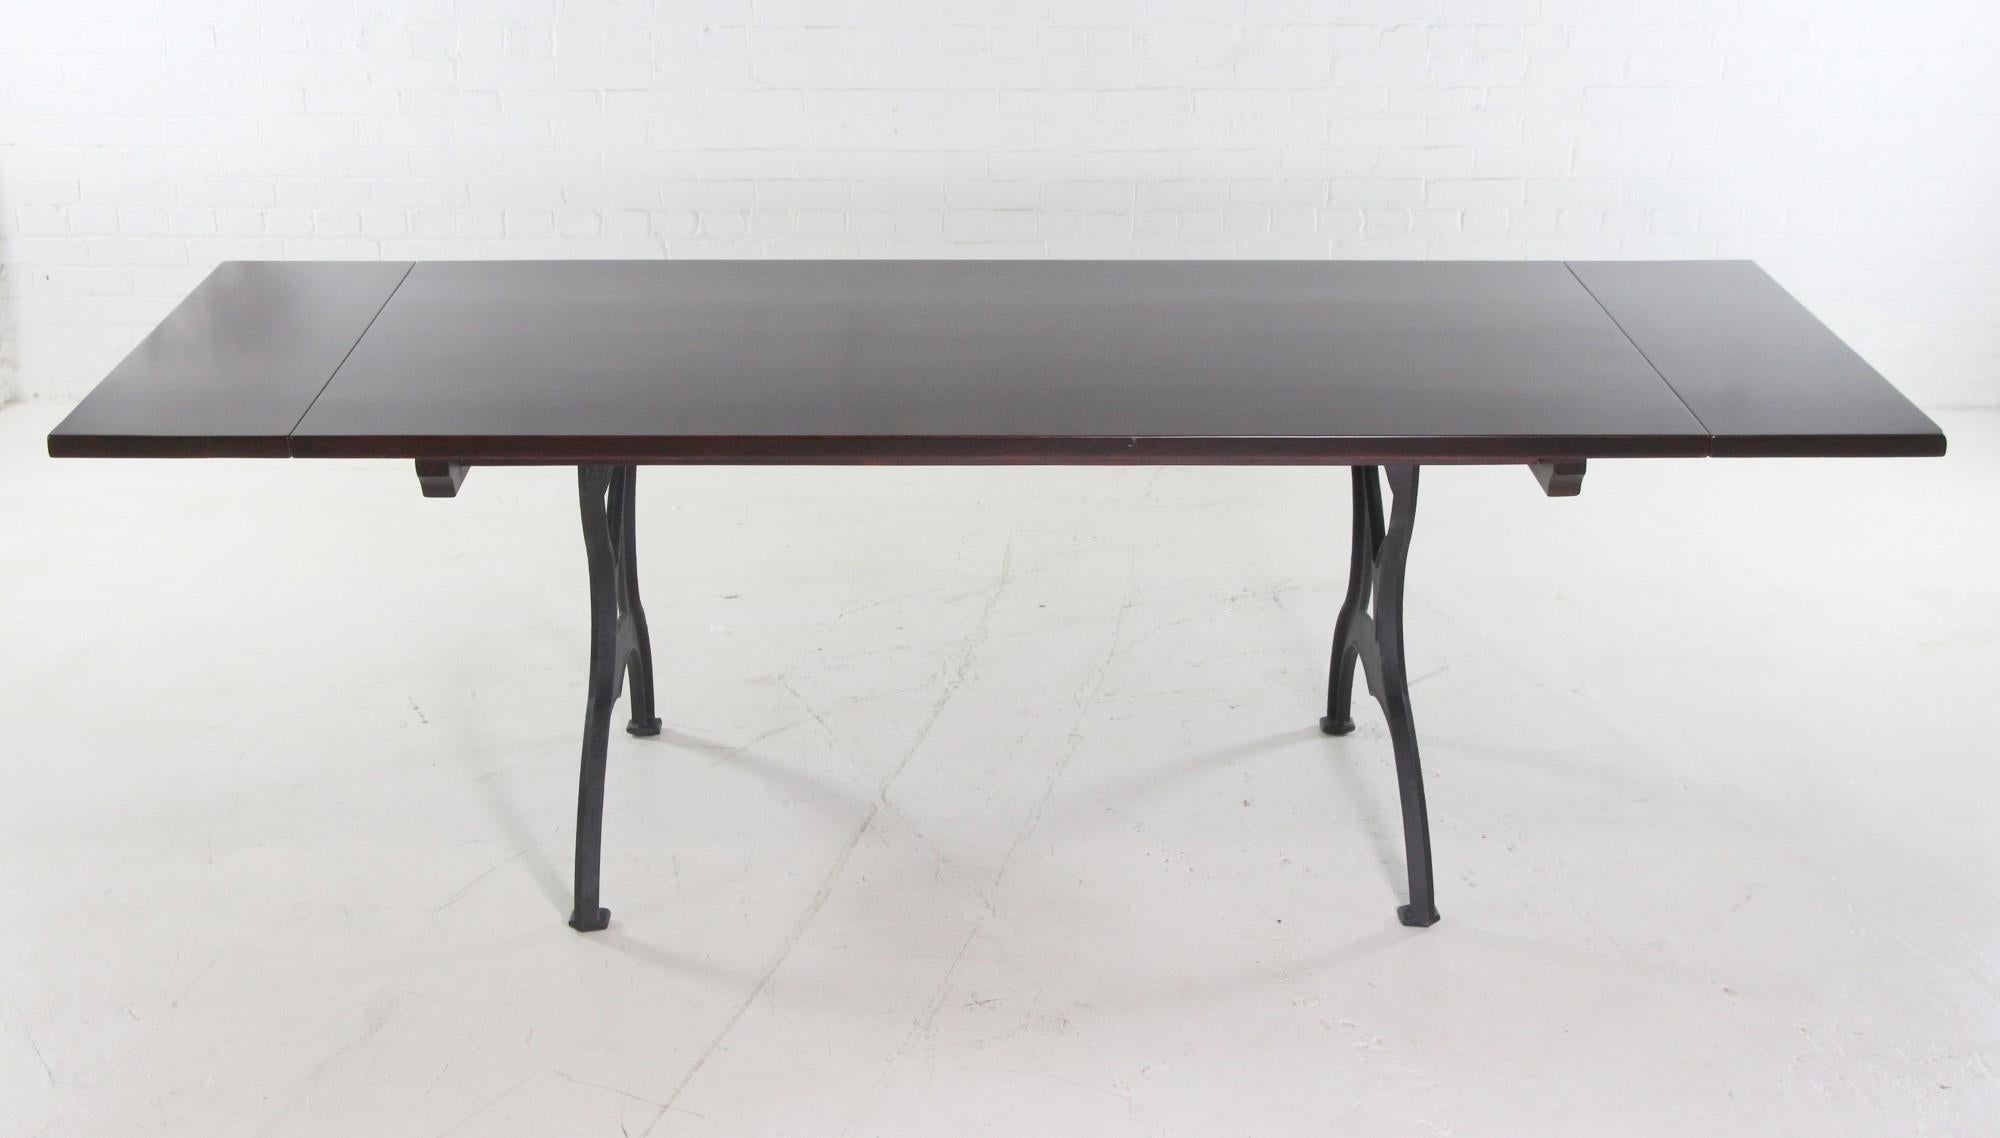 Red Mahogany Apitong Table w Extensions Cast Iron Legs Brooklyn, NY For Sale 6